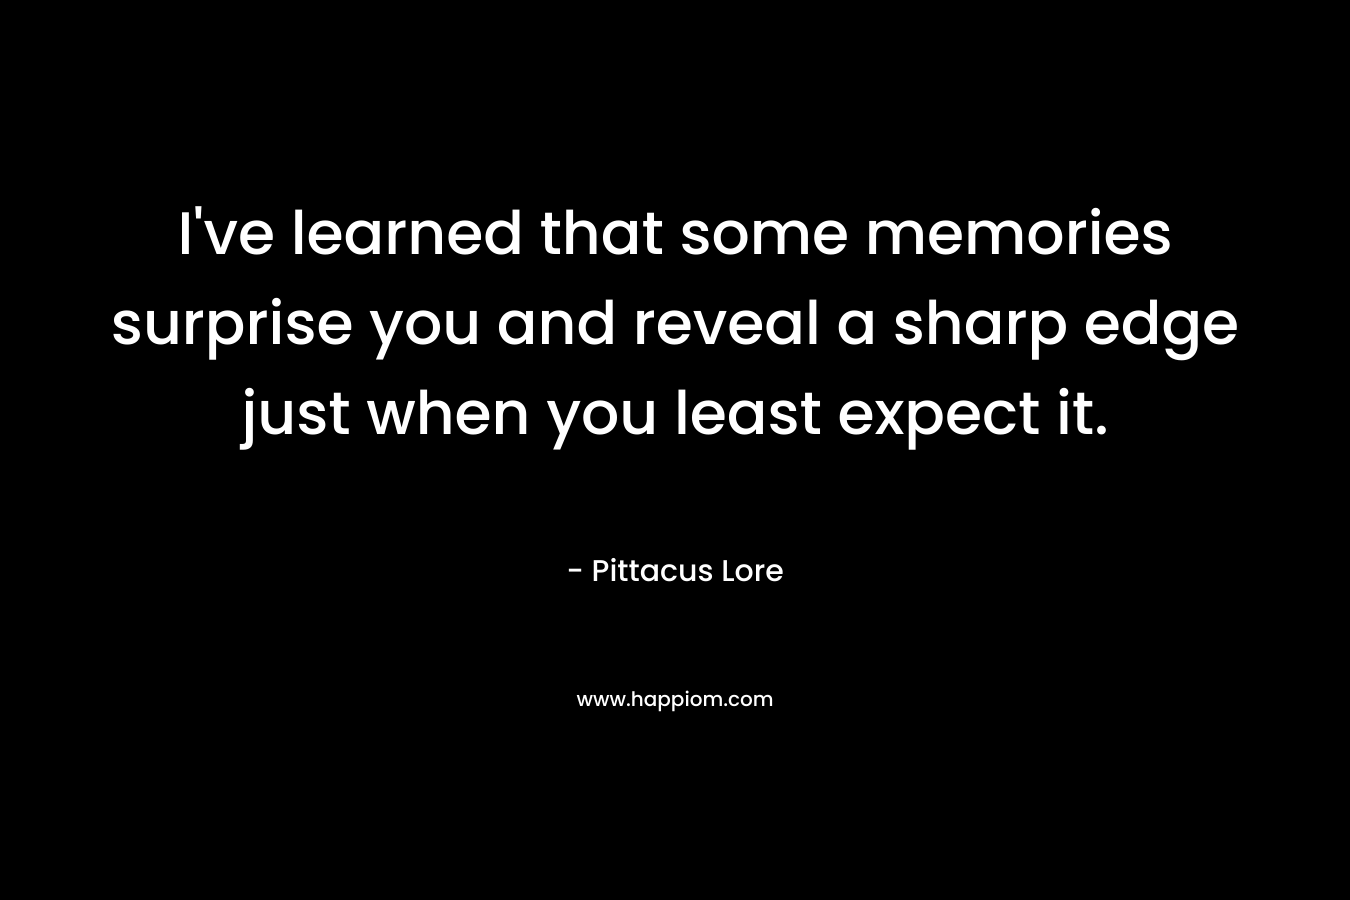 I’ve learned that some memories surprise you and reveal a sharp edge just when you least expect it. – Pittacus Lore